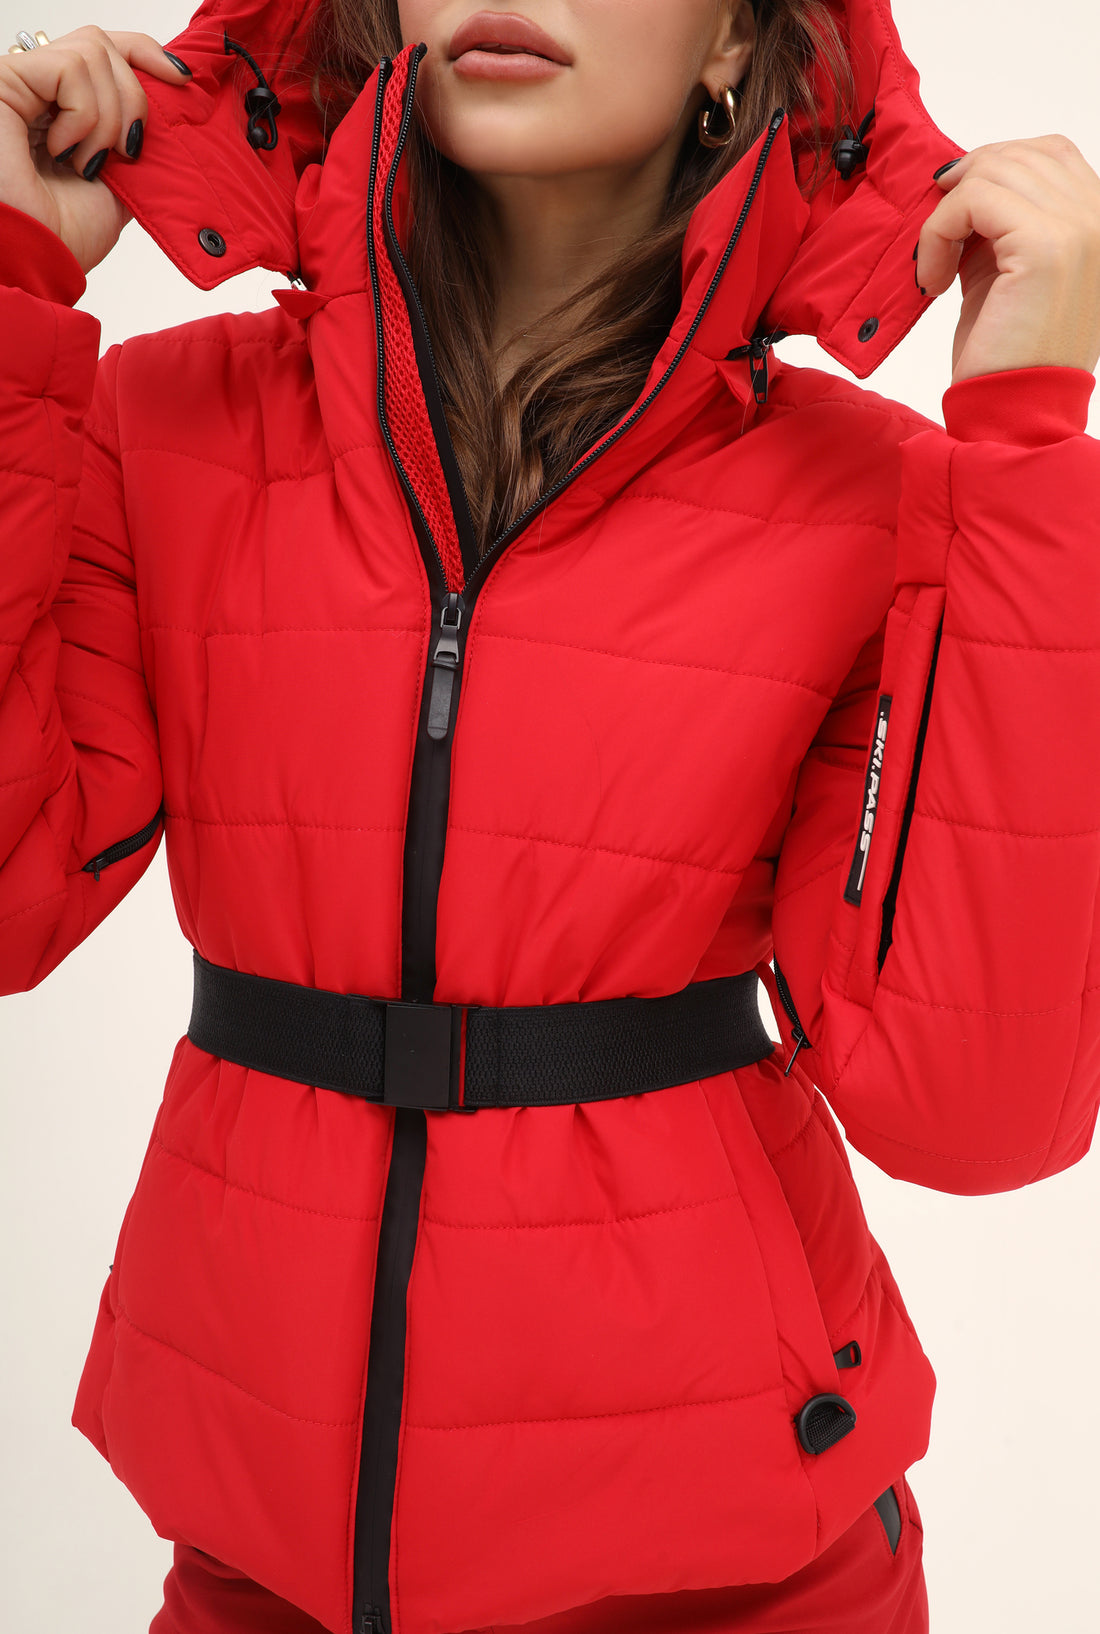 Red two piece ski outfit - McKinley Red - Red ski suit